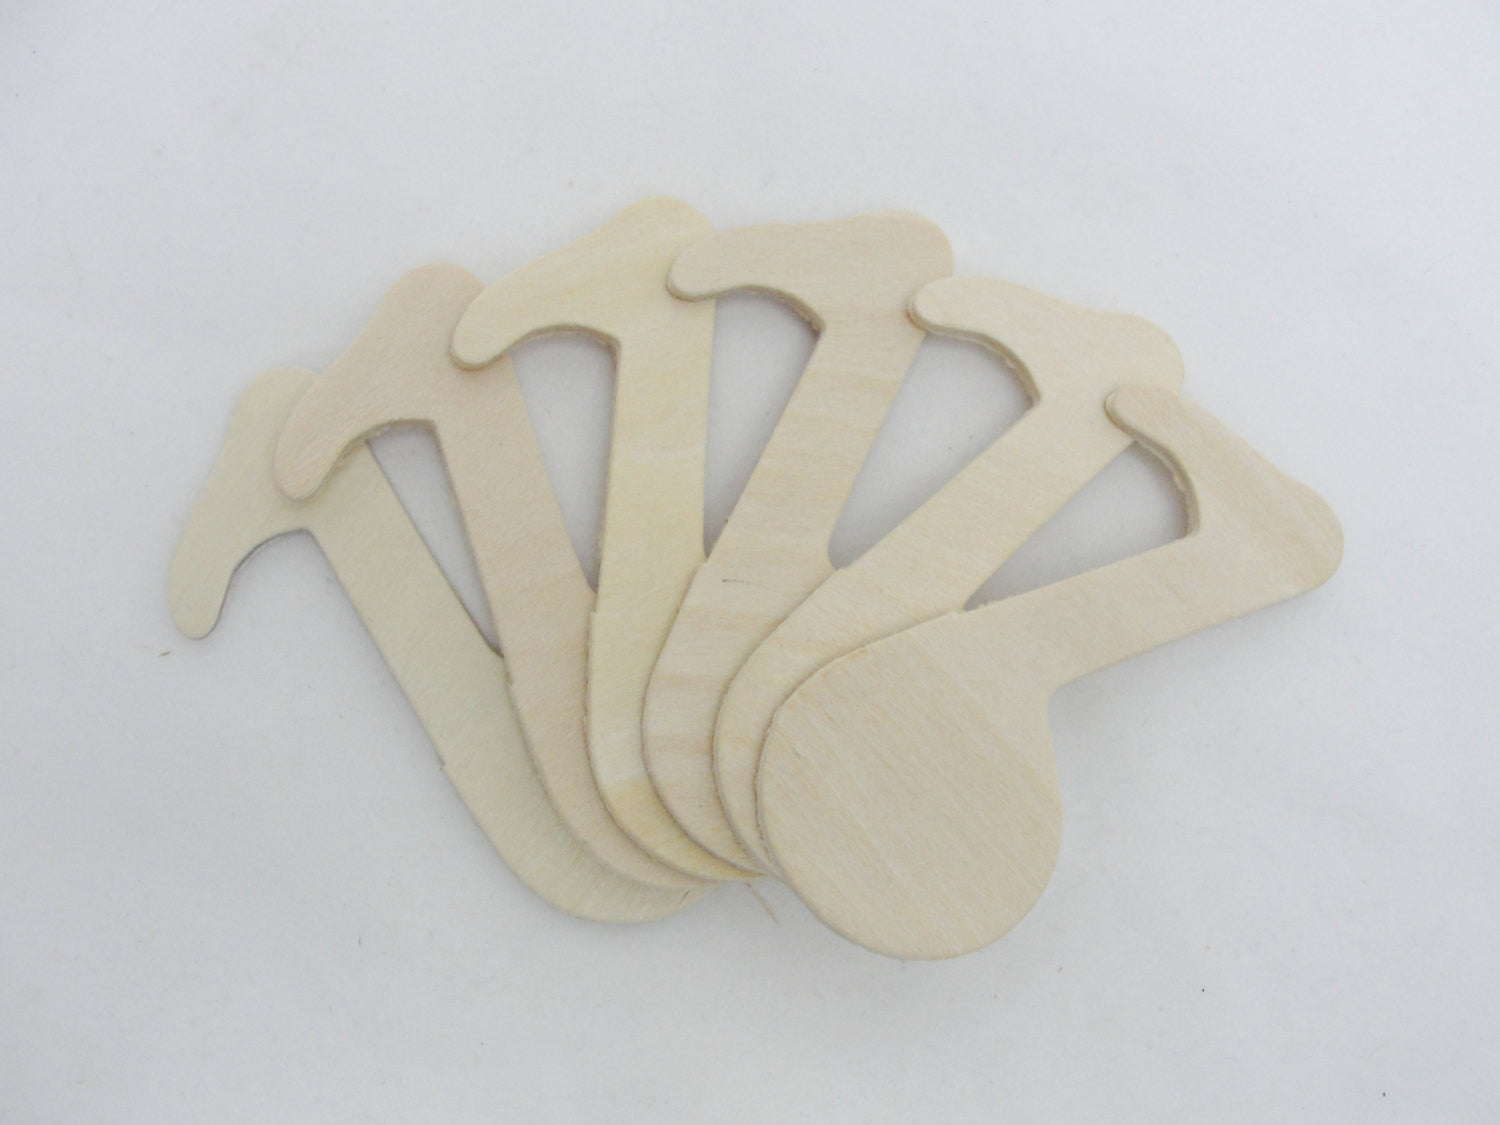 Music note ornament set of 6 - Wood parts - Craft Supply House